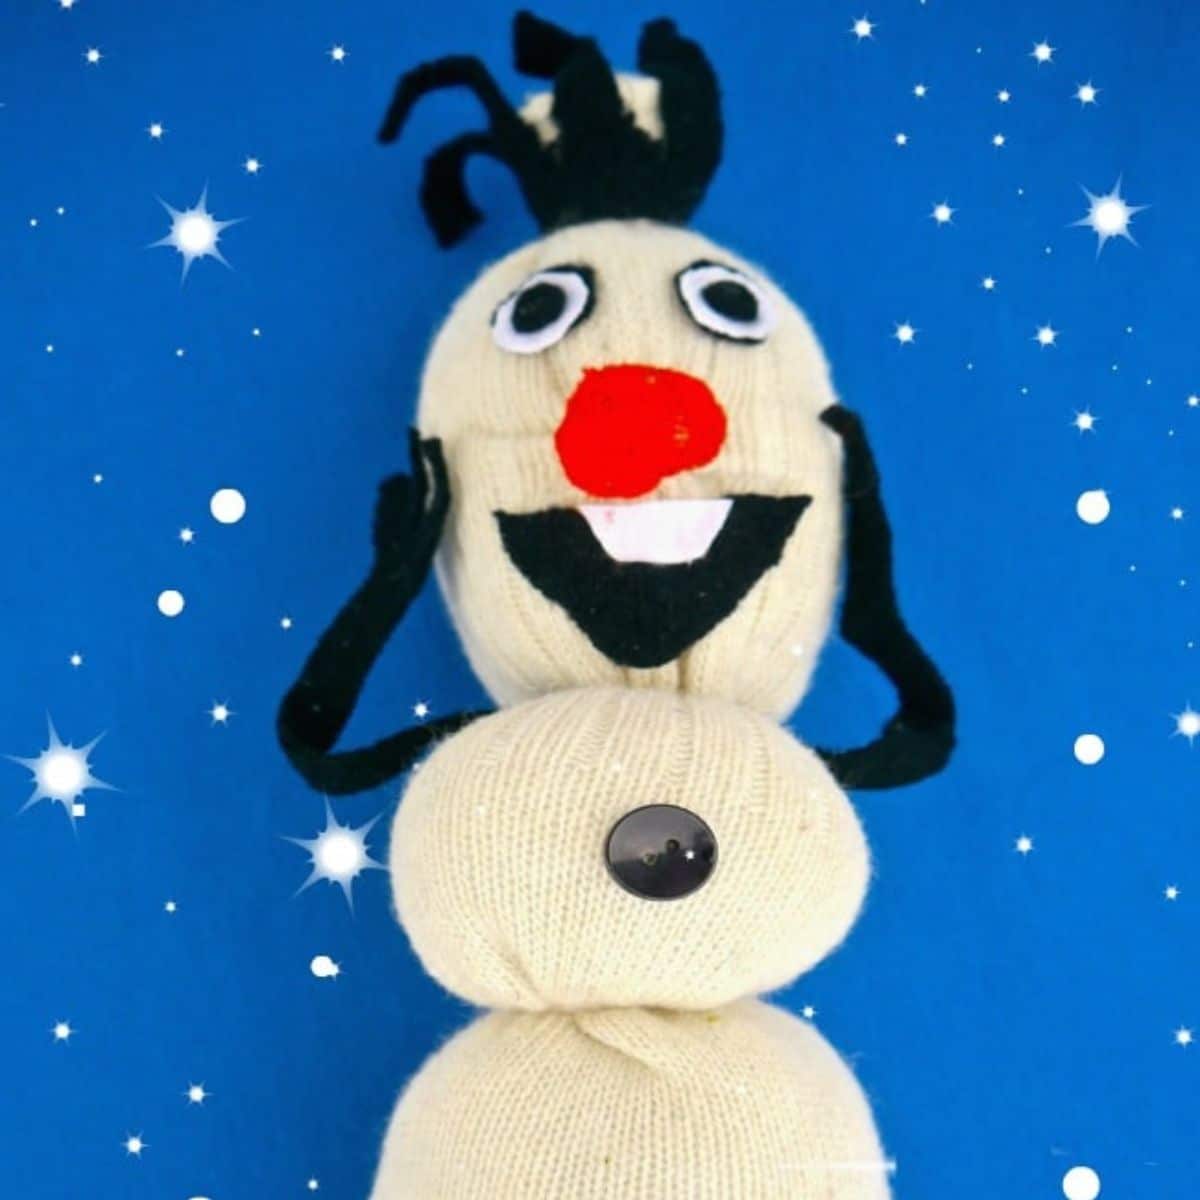 Olaf craft for kids from a sock.